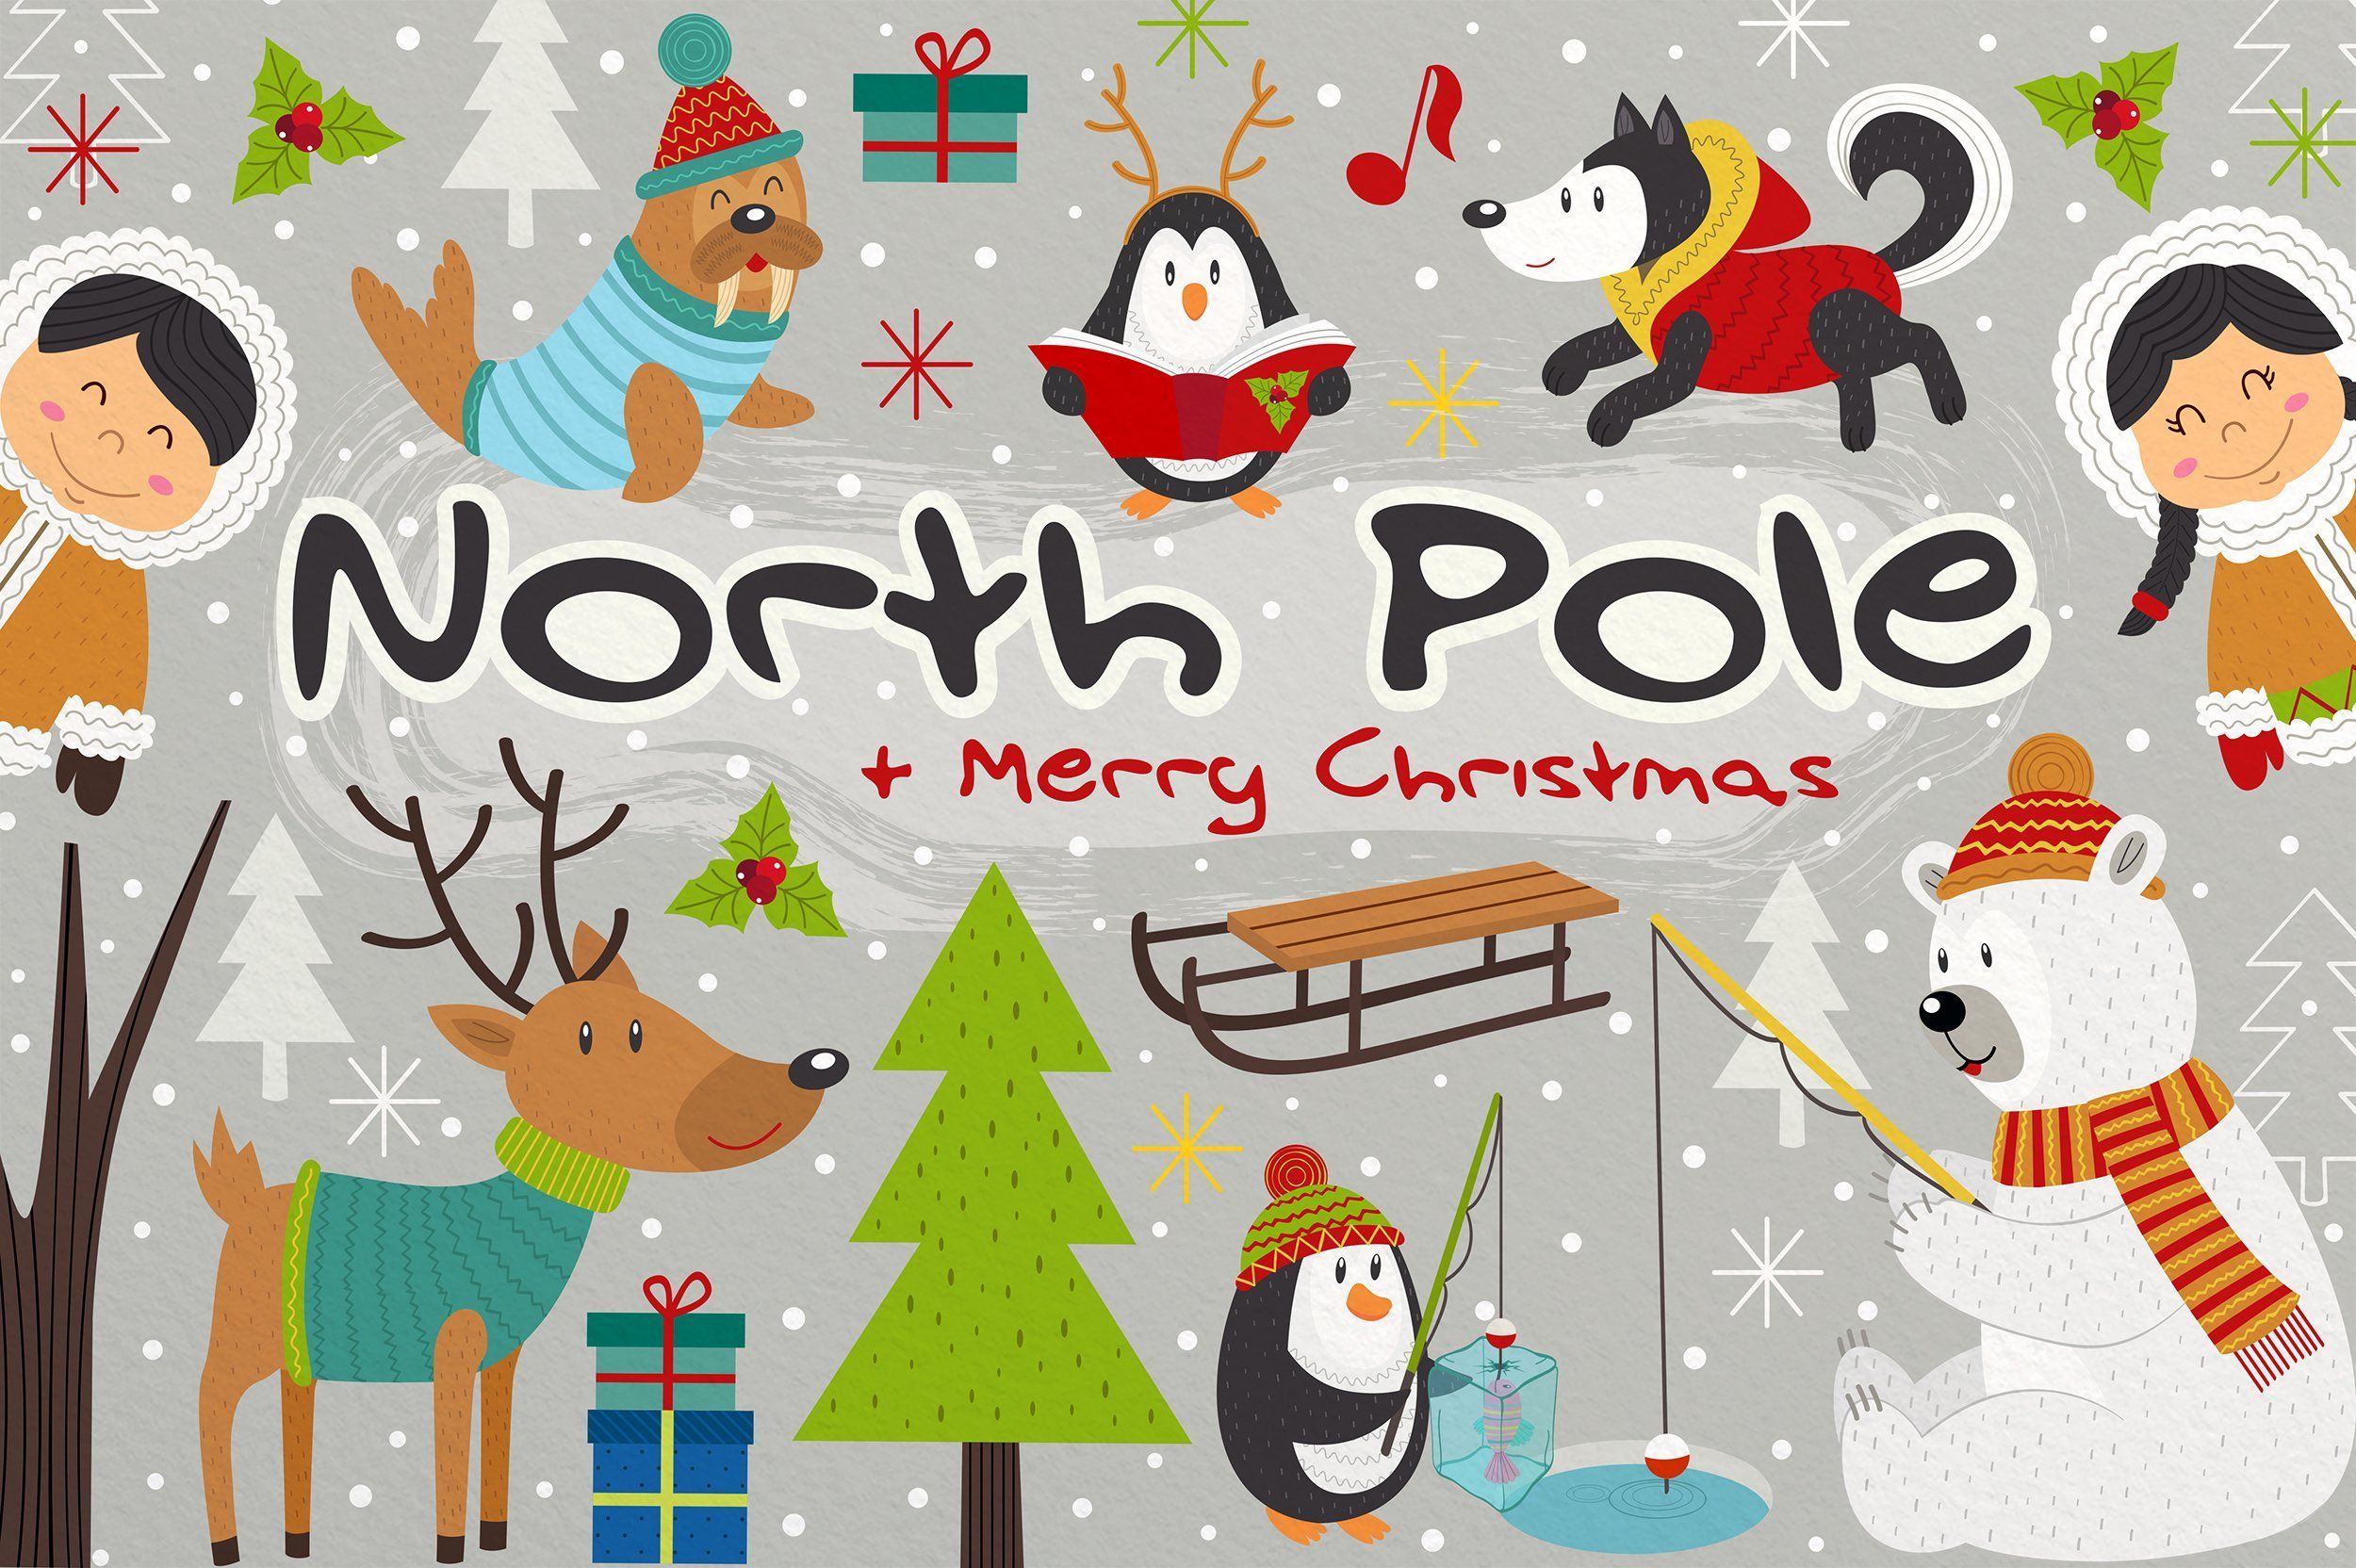 North Pole and Merry Christmas. Merry christmas wallpaper, Christmas wallpaper background, Christmas characters